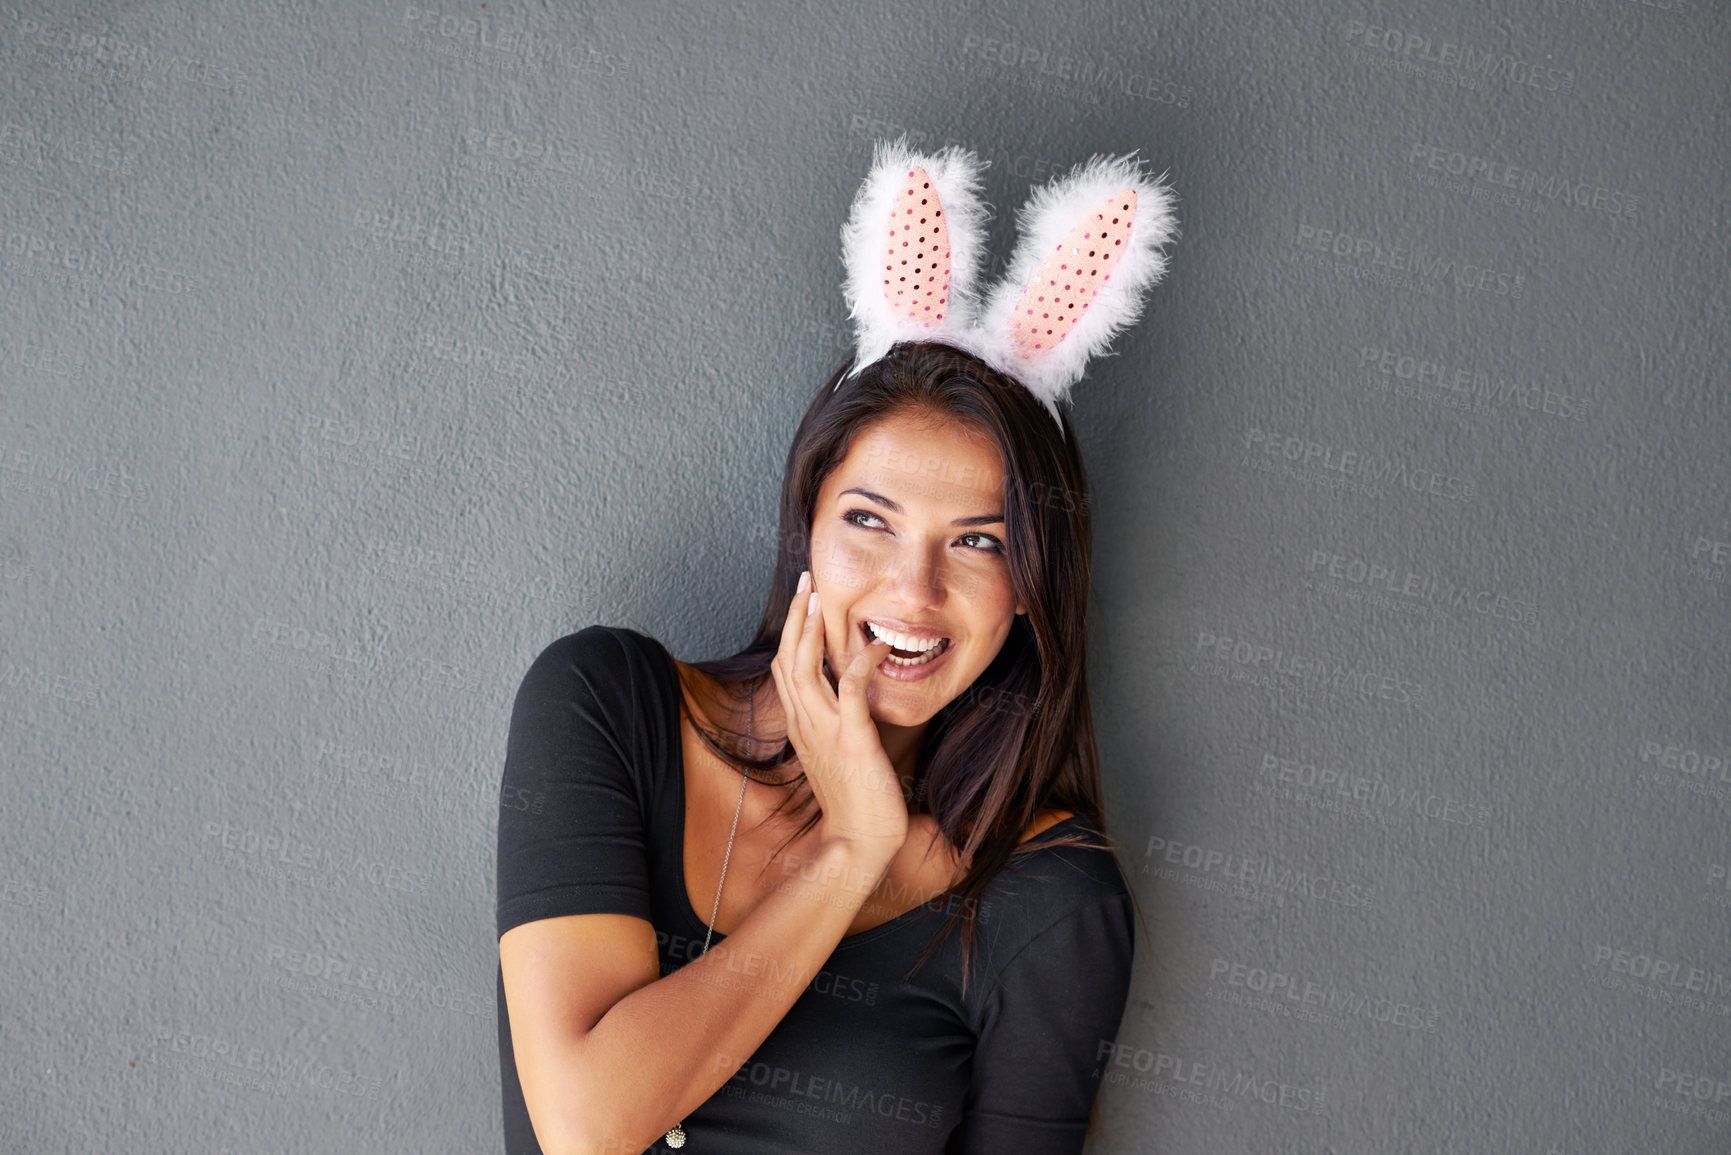 Buy stock photo Thinking, space or portrait of happy woman with bunny ears isolated on wall or grey background. Model laughing, confident or casual female person in studio with smile, funny joke or ideas on mock up